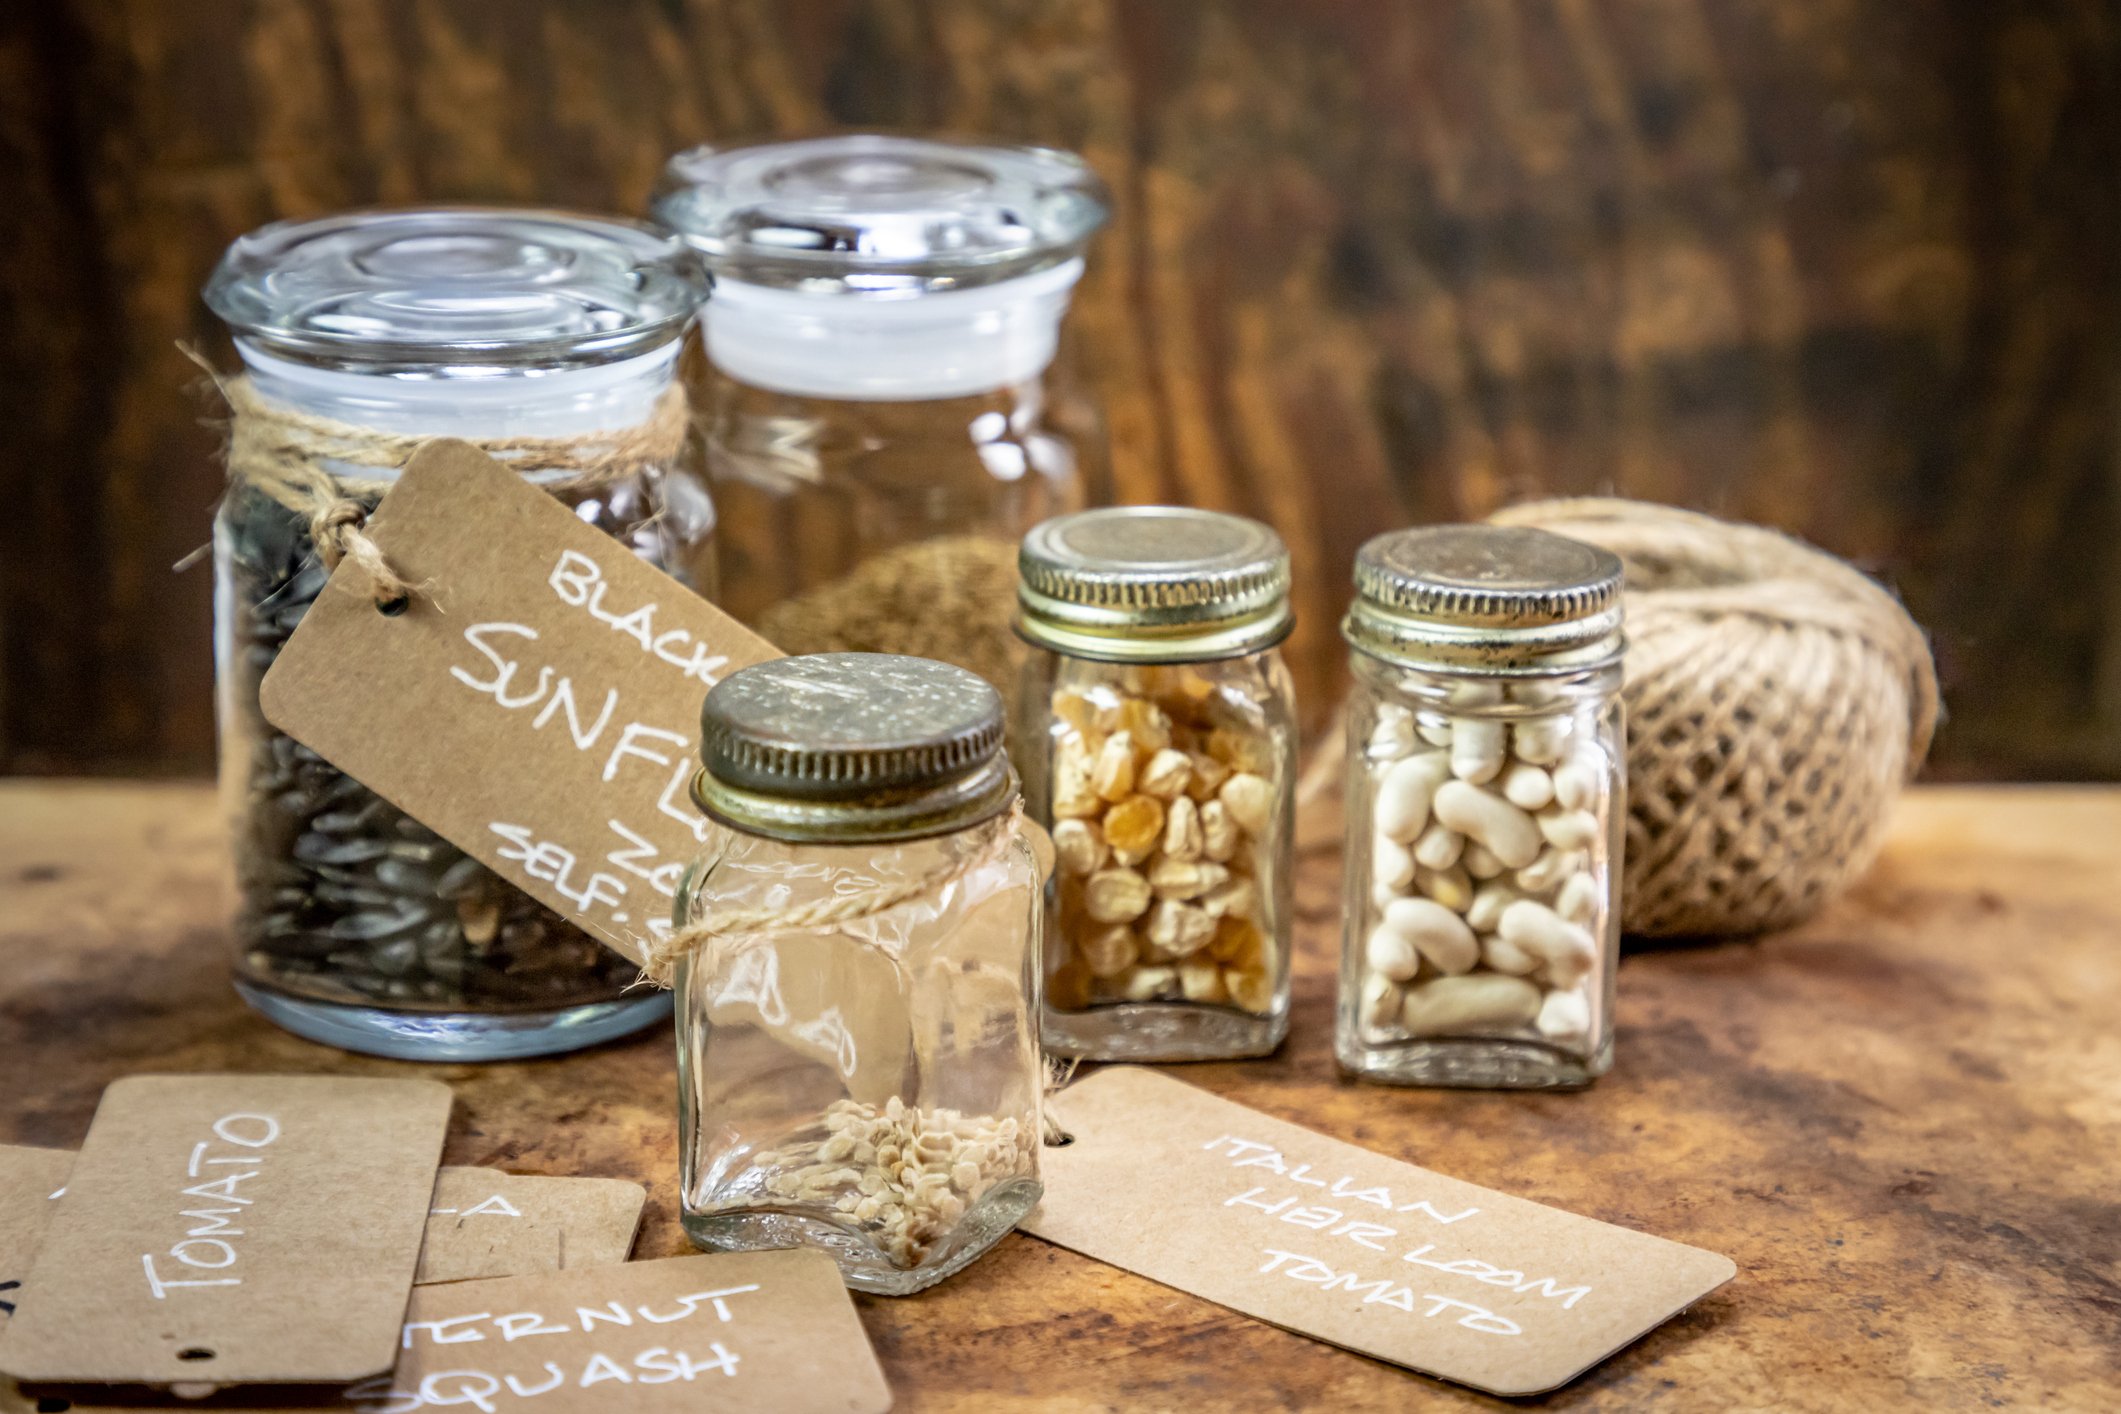 Introduction to Seed Saving